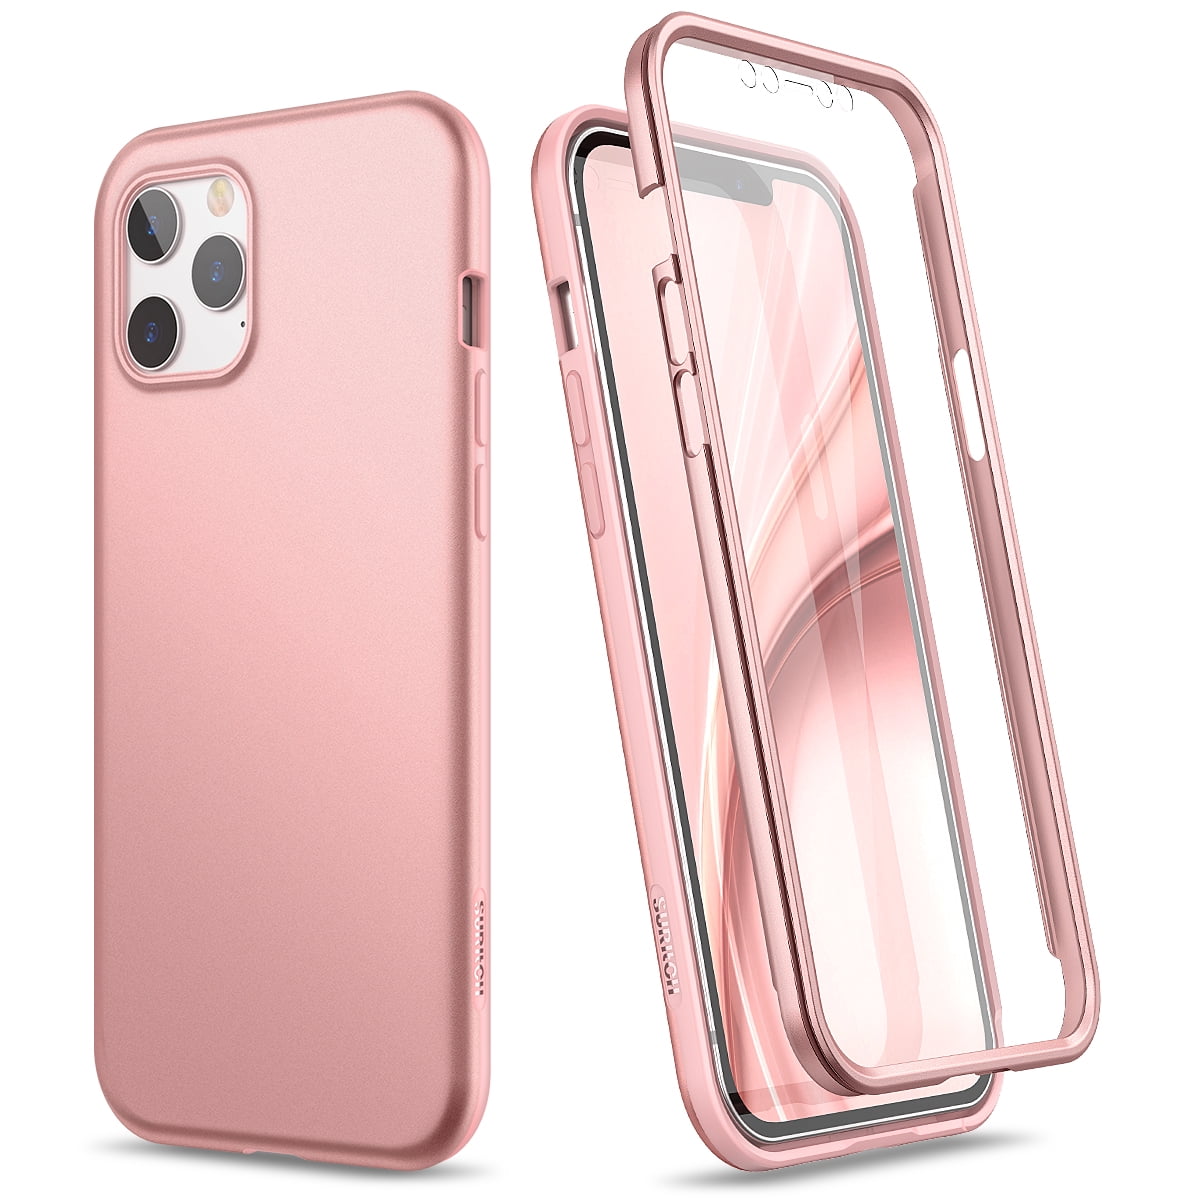 Suritch Slim Case For Iphone 12 Pro Max Built In Screen Protector Hard Plastic Protective Phone Cover With Matte Finish Coating Cases For Iphone 12 Pro Max 5g 6 7 Inch Rose Gold